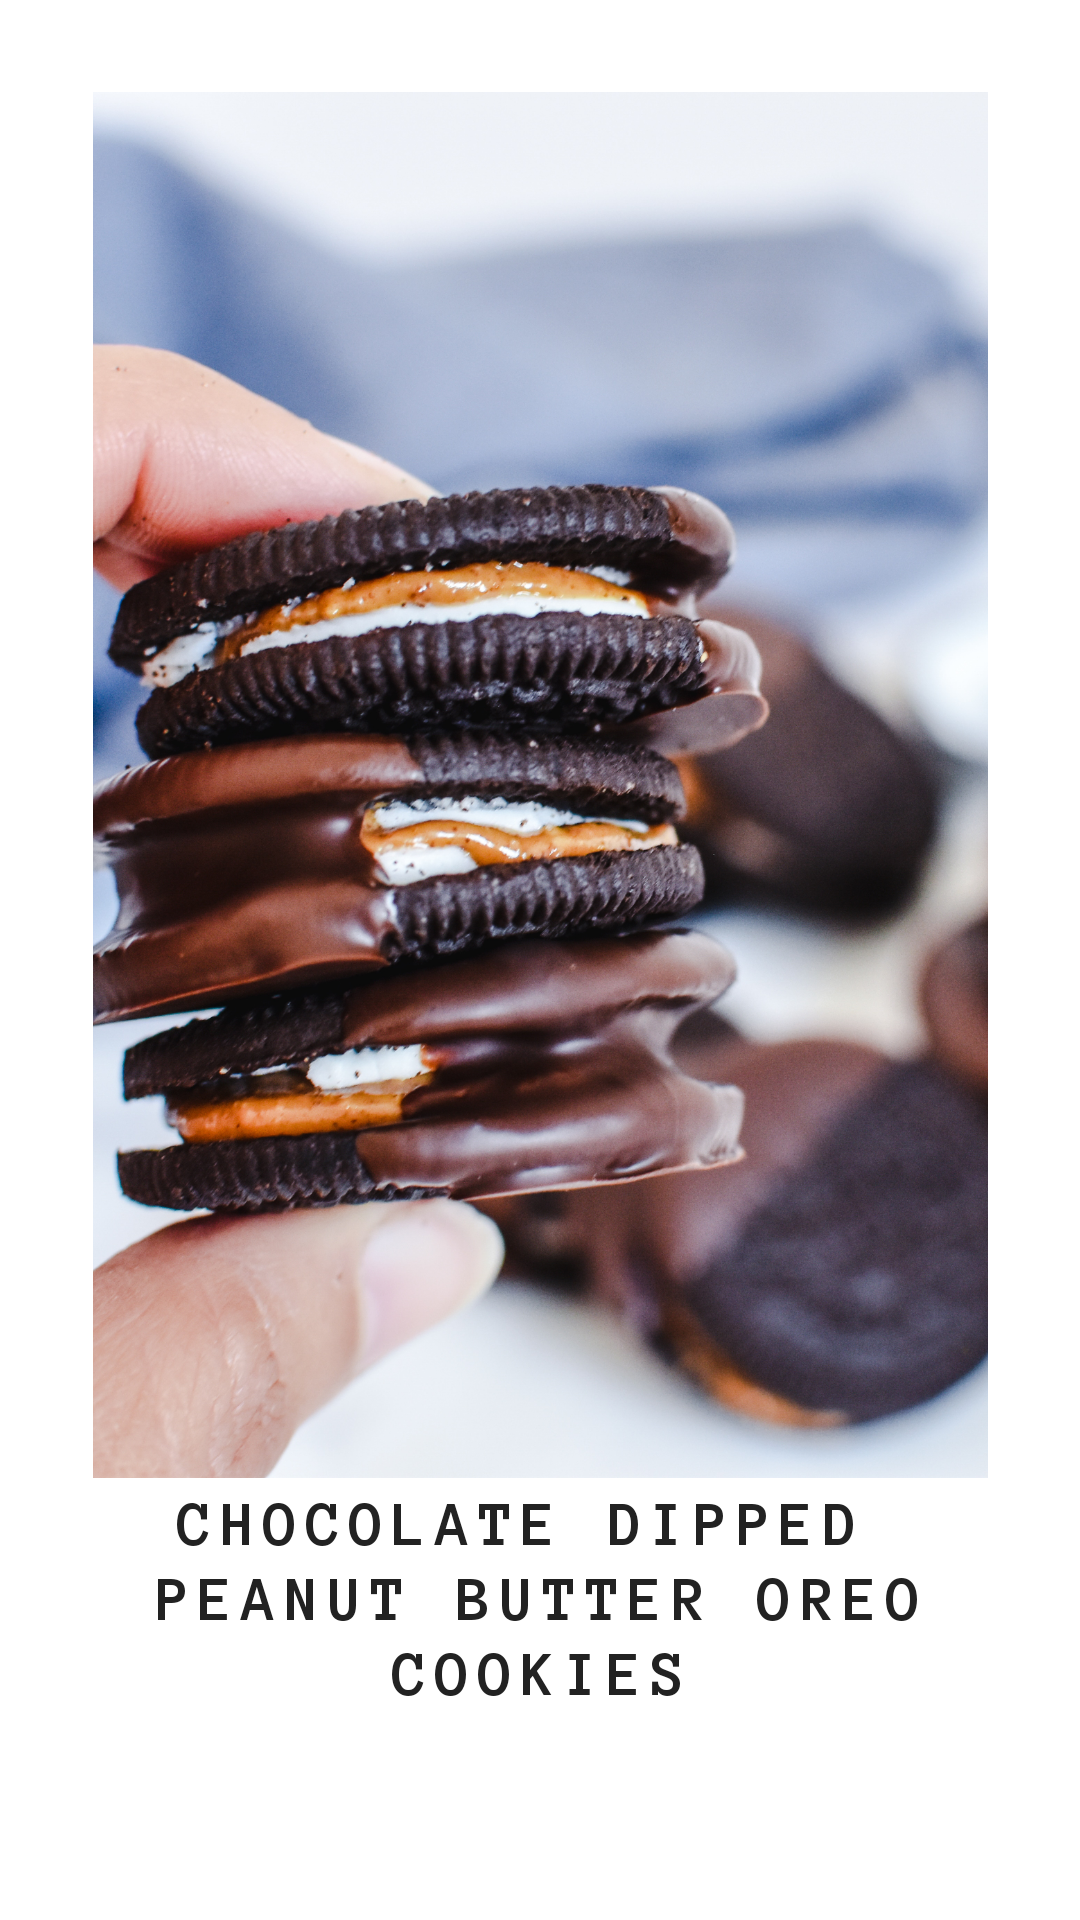 Chocolate dipped peanut butter Oreo cookies - Anne Travel Foodie